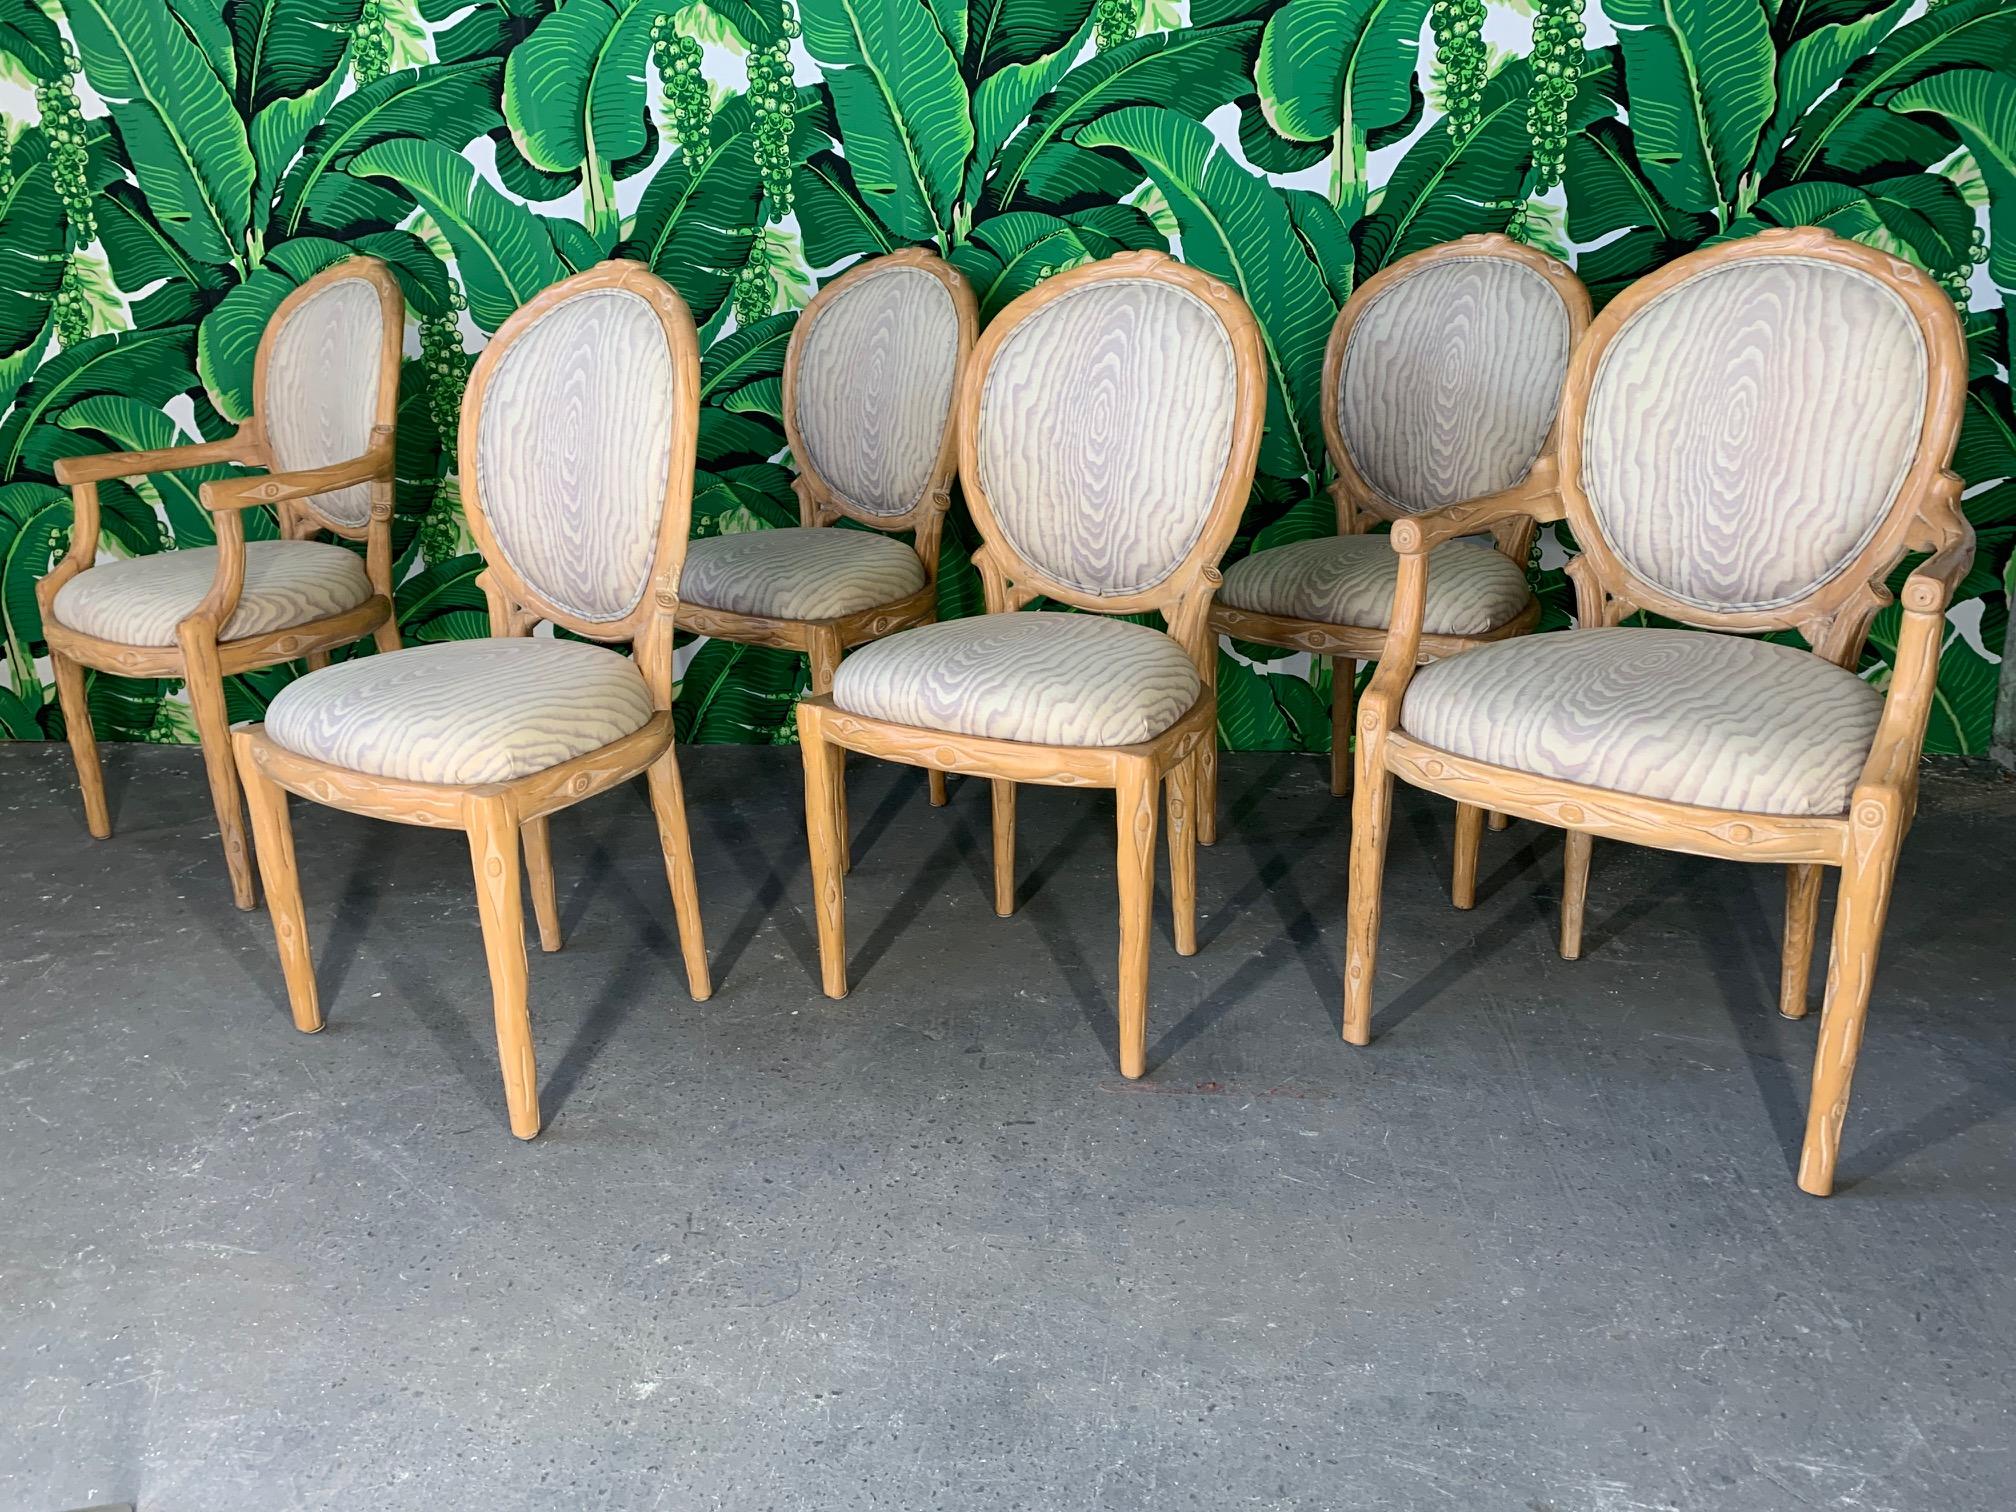 Set of 6 faux bois carved dining chairs in very good condition. Four side chairs and two arm chairs. Upholstery also in very good condition.